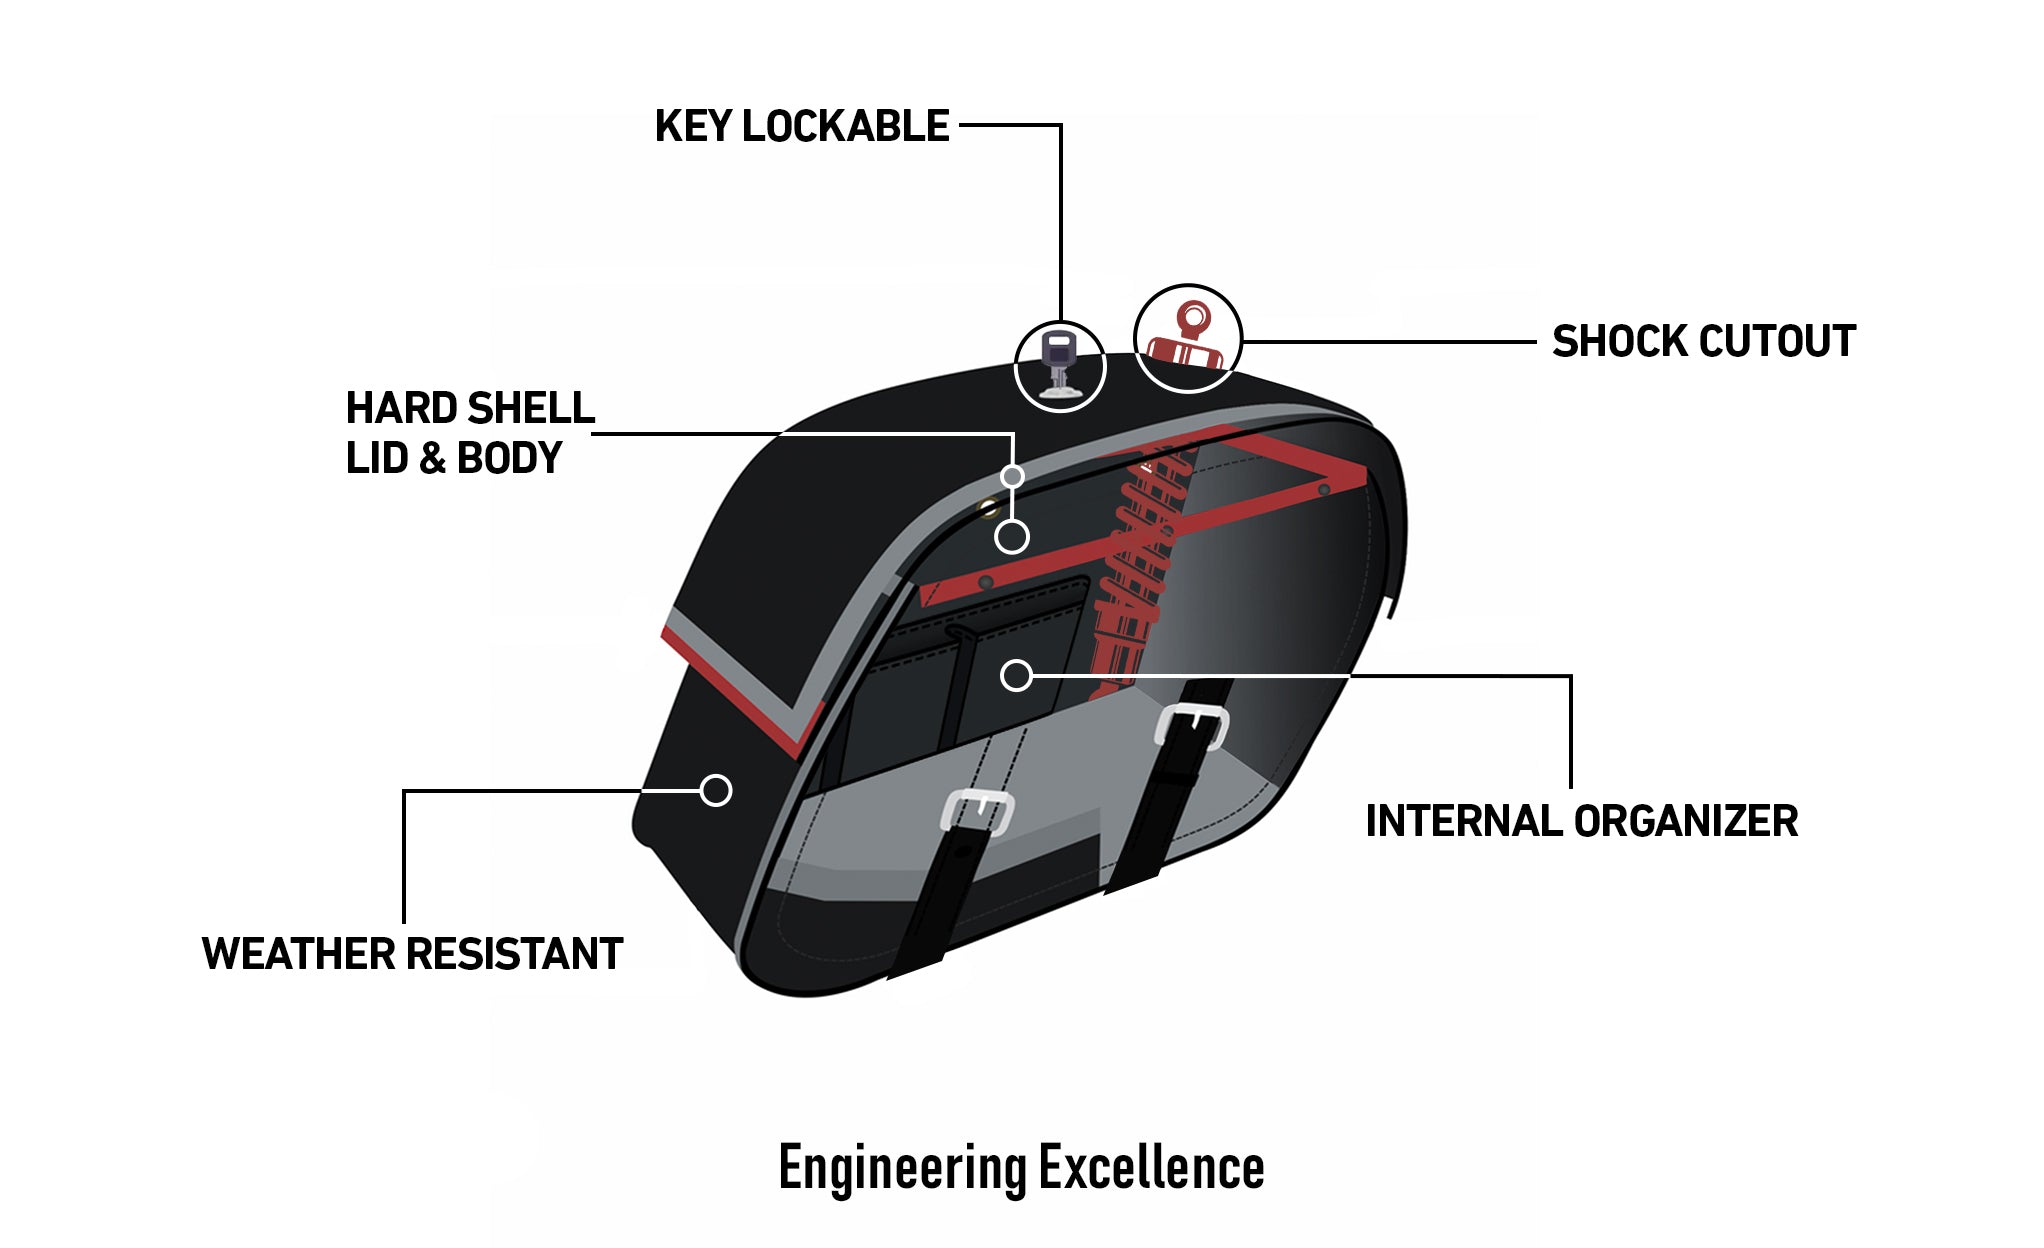 Viking Raven Extra Large Honda 1500 Valkyrie Tourer Shock Cut Out Leather Motorcycle Saddlebags Engineering Excellence with Bag on Bike @expand